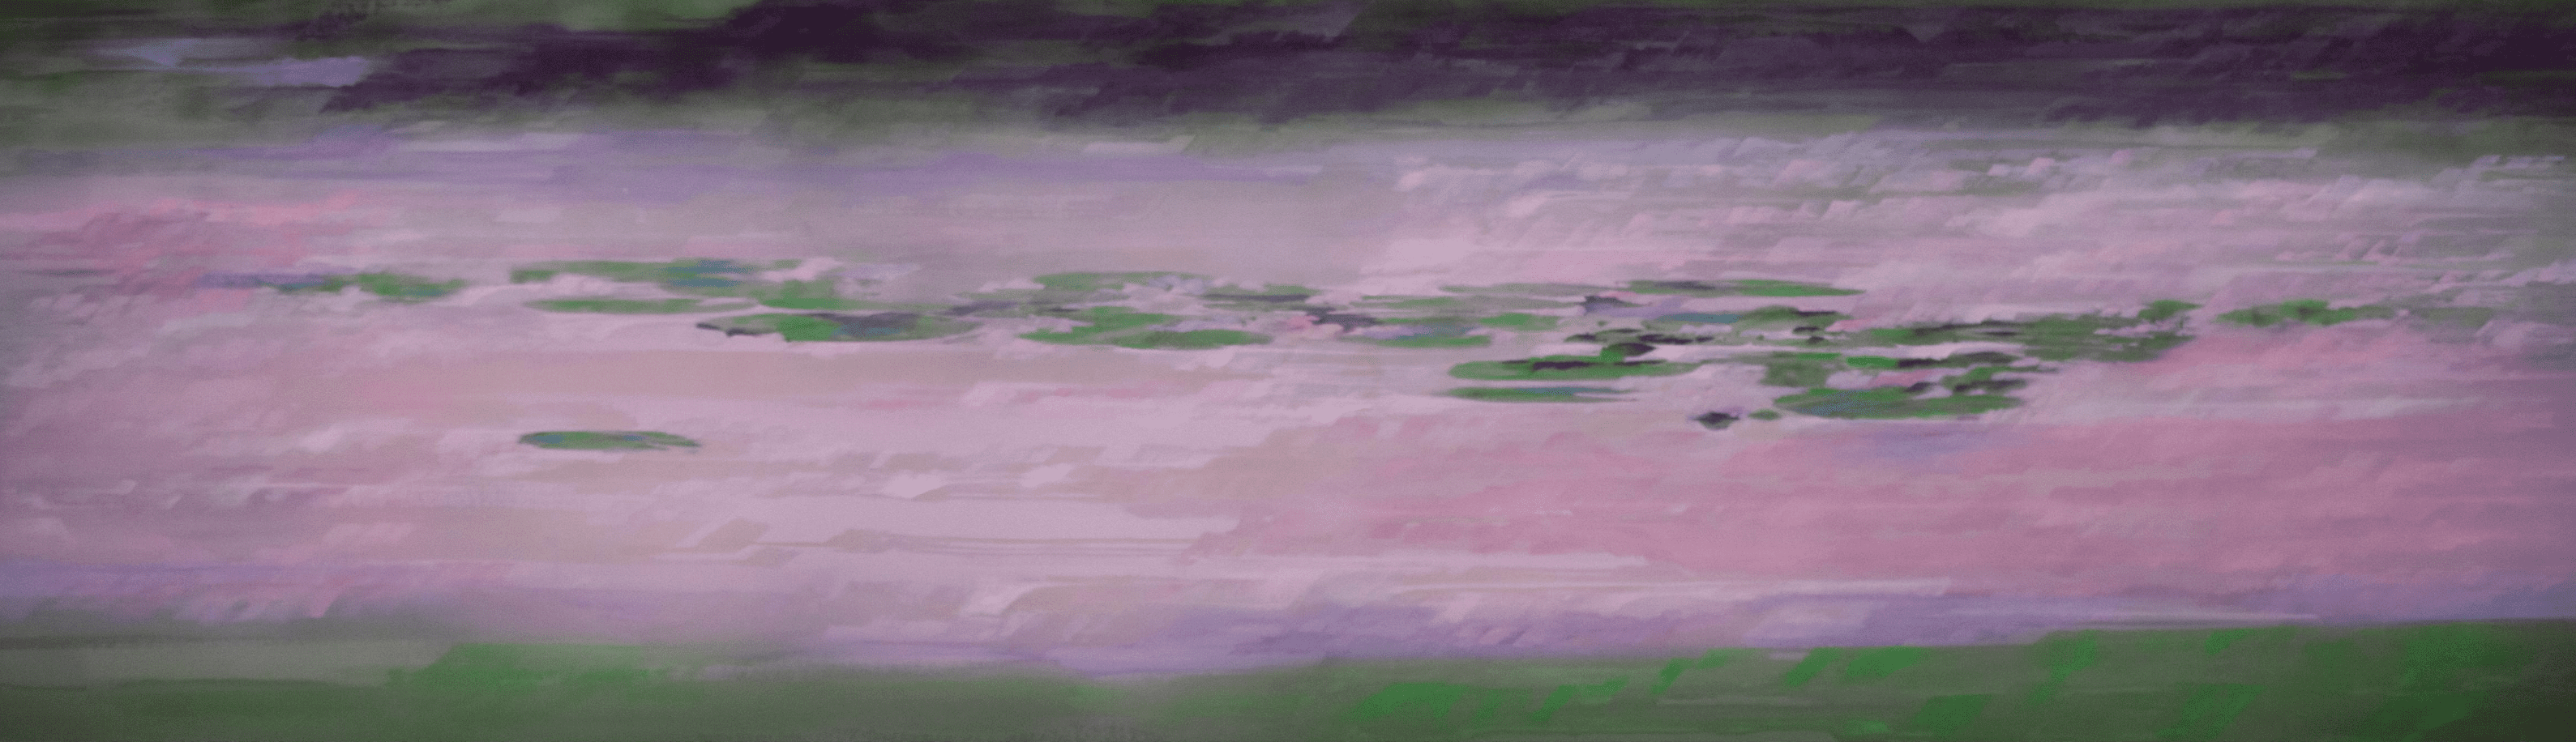 Lavender Line | 32” x 113” | Mixed Media on Canvas - 2012 | $22,000